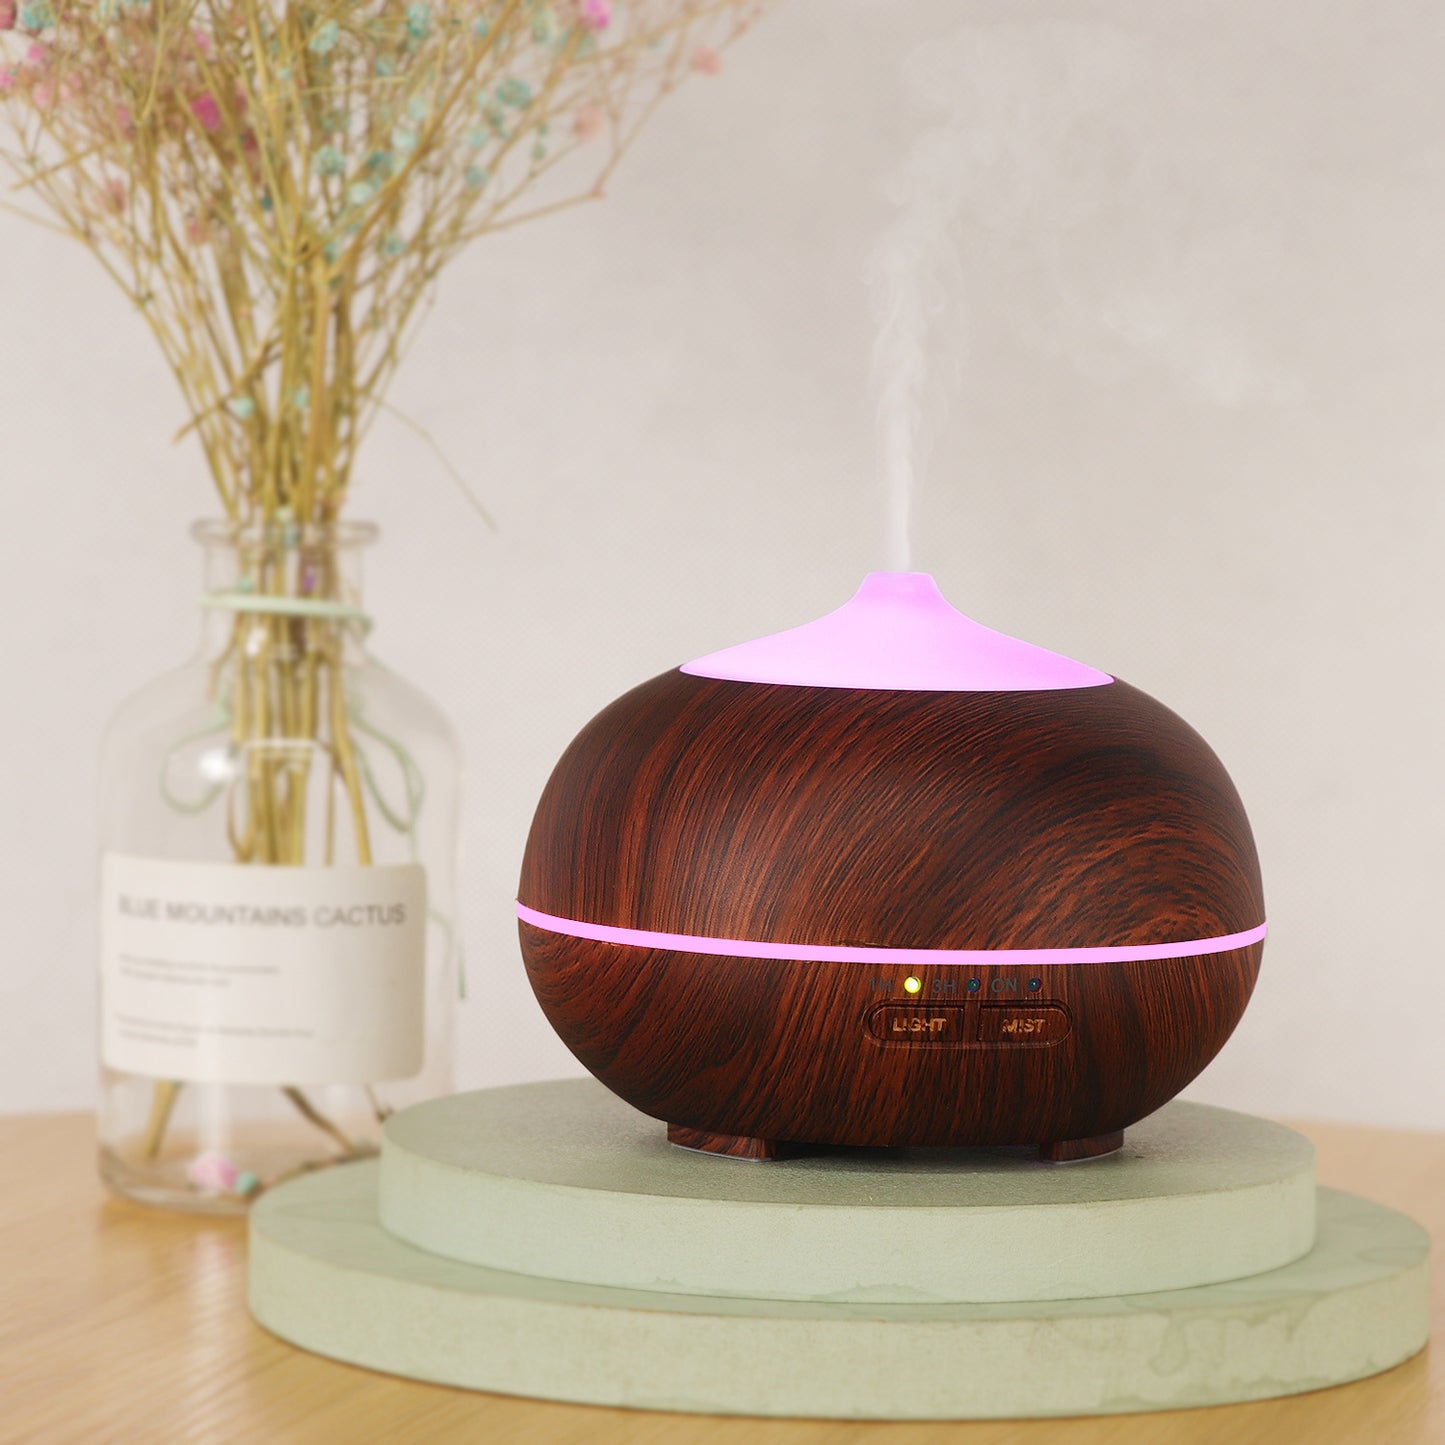 Wood grain aromatherapy humidifier home air purifier essential oil diffuser